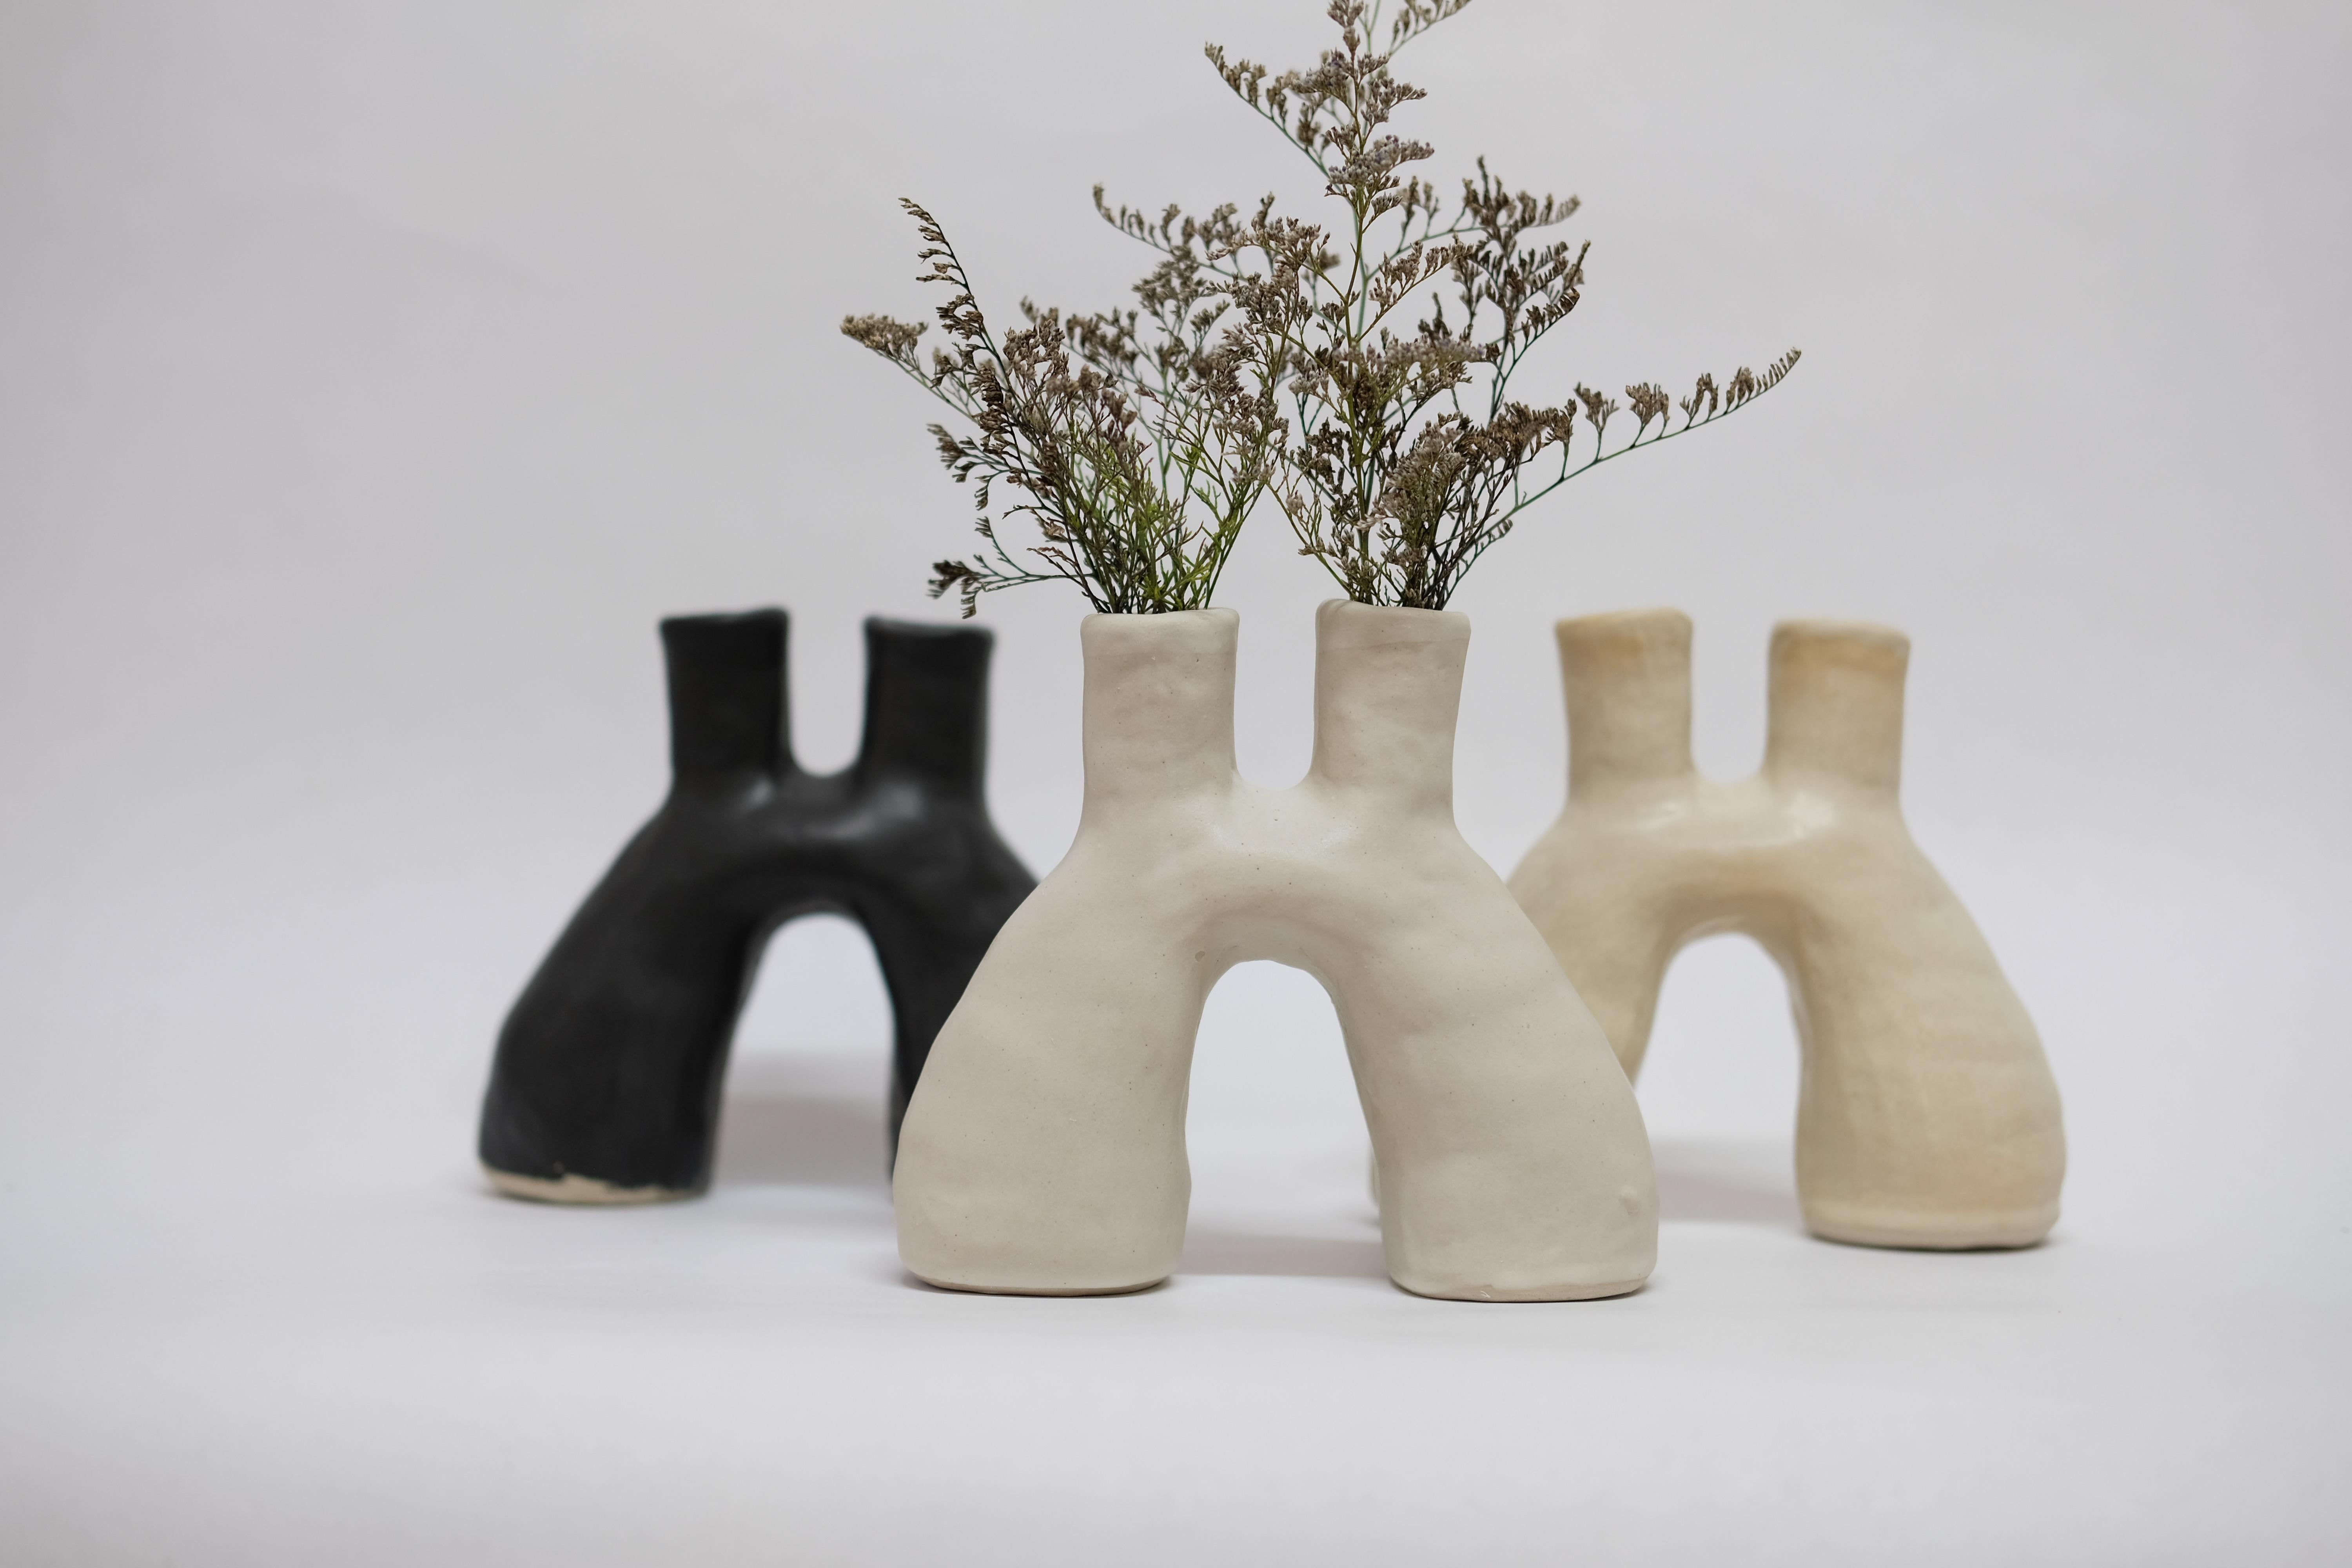 Set of 3 portal stoneware vases by Camila Apaez
One of a kind
Materials: Stoneware
Dimensions: 7 x 17 x 14 cm
Options: White bone, butter milk, stone sage.

This year has been shaped by the topographies of our homes and the uncertainty of our time.